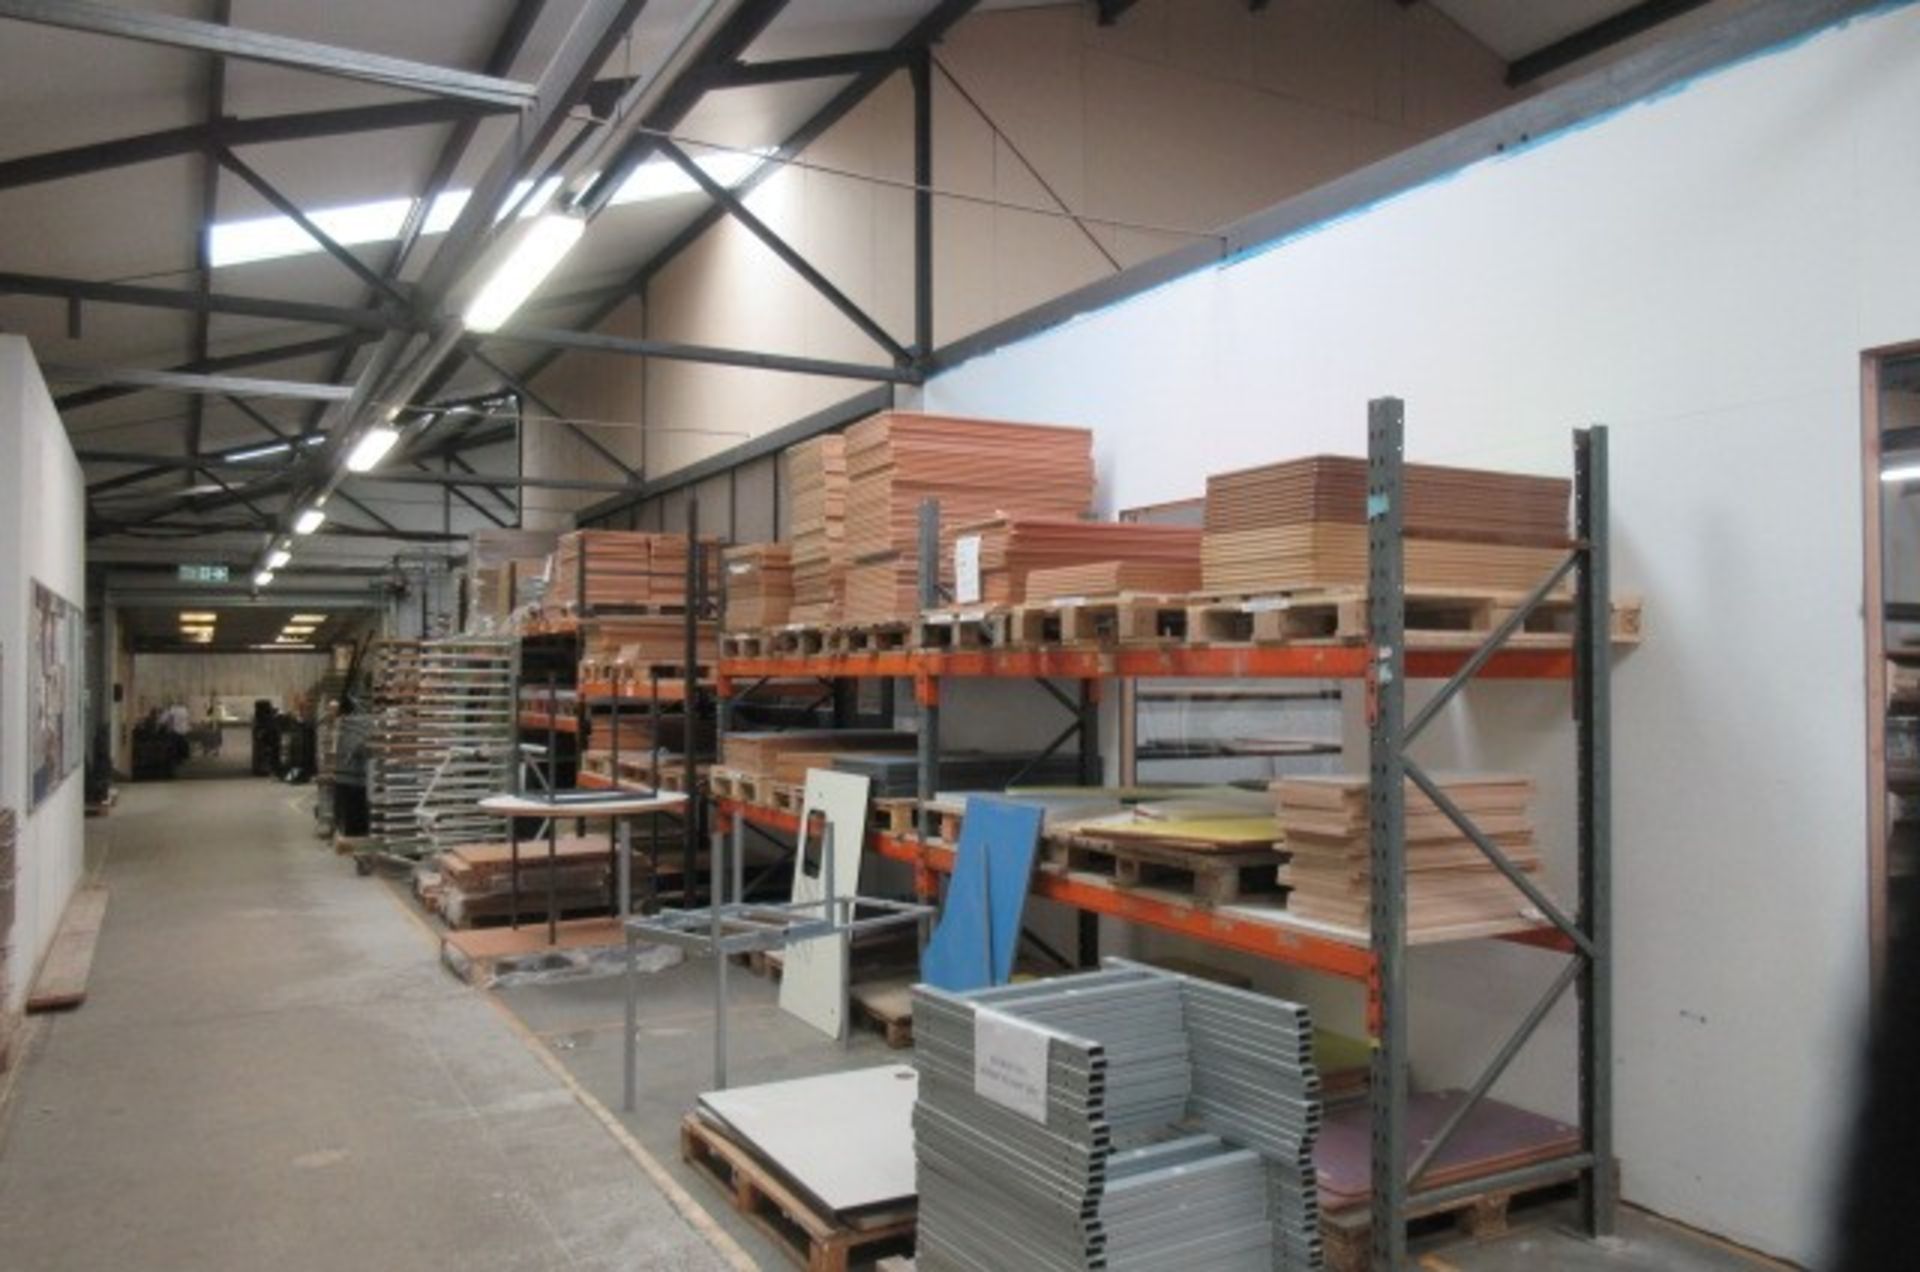 8 bays of assorted pallet racking